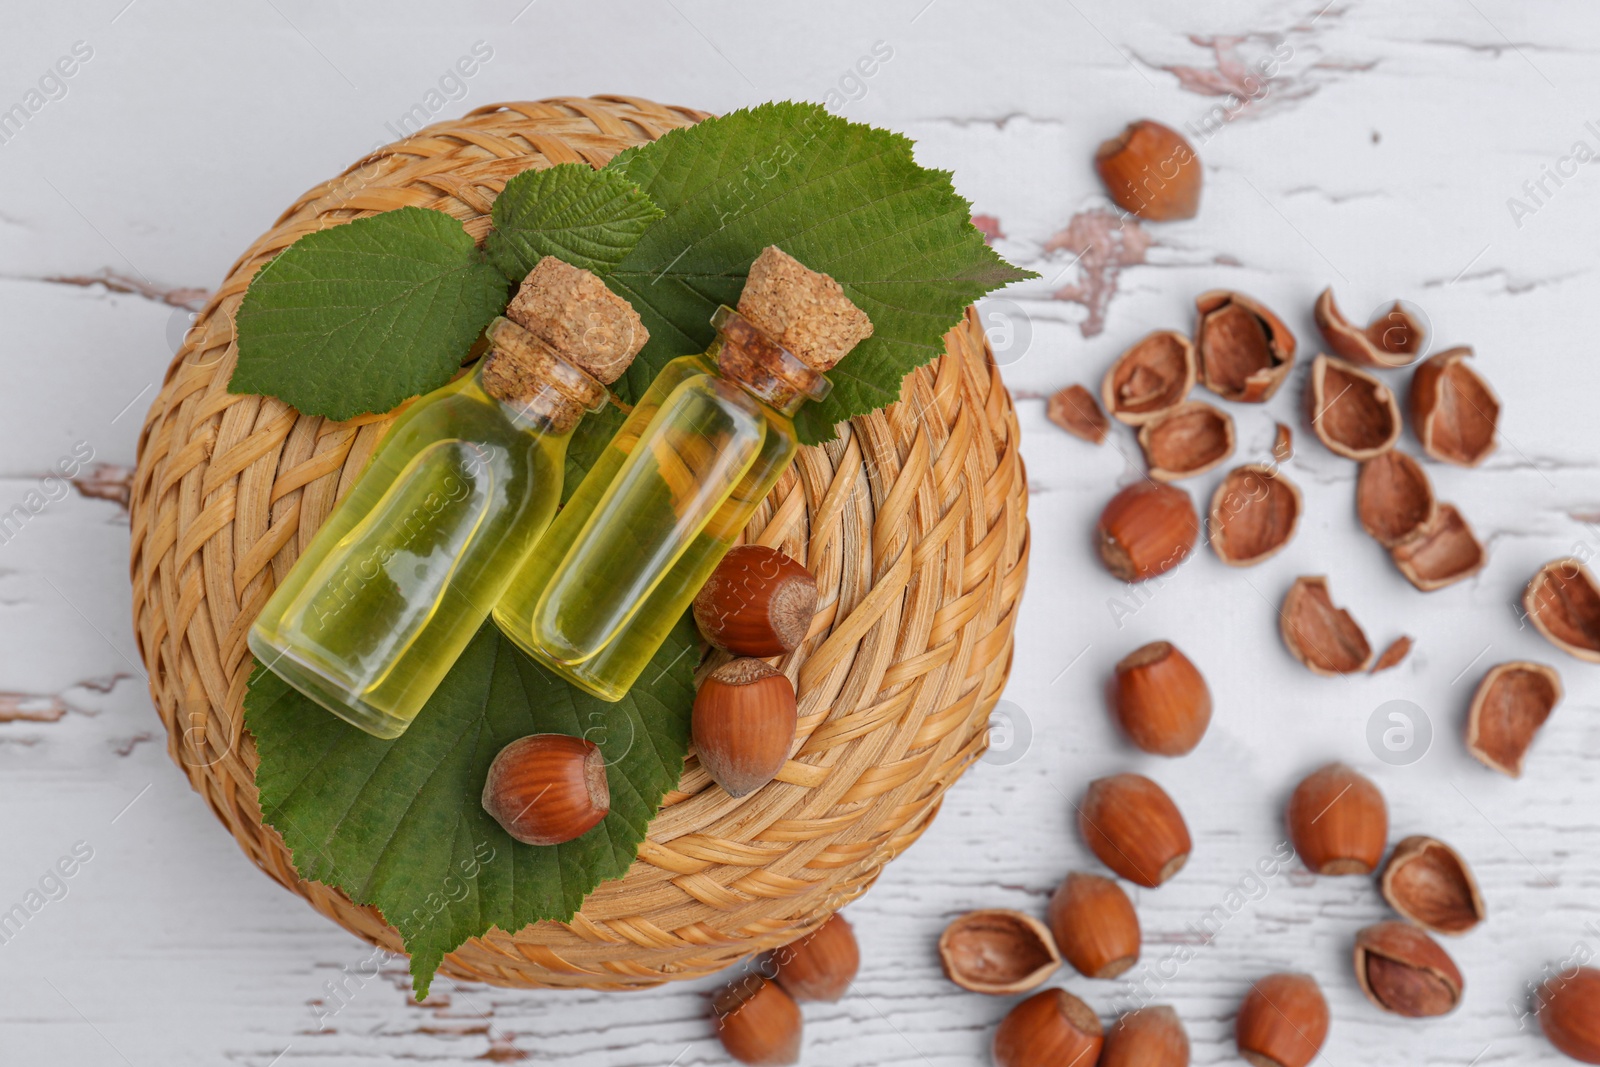 Photo of Bottles of hazelnut essential oil and nuts on wooden table, flat lay